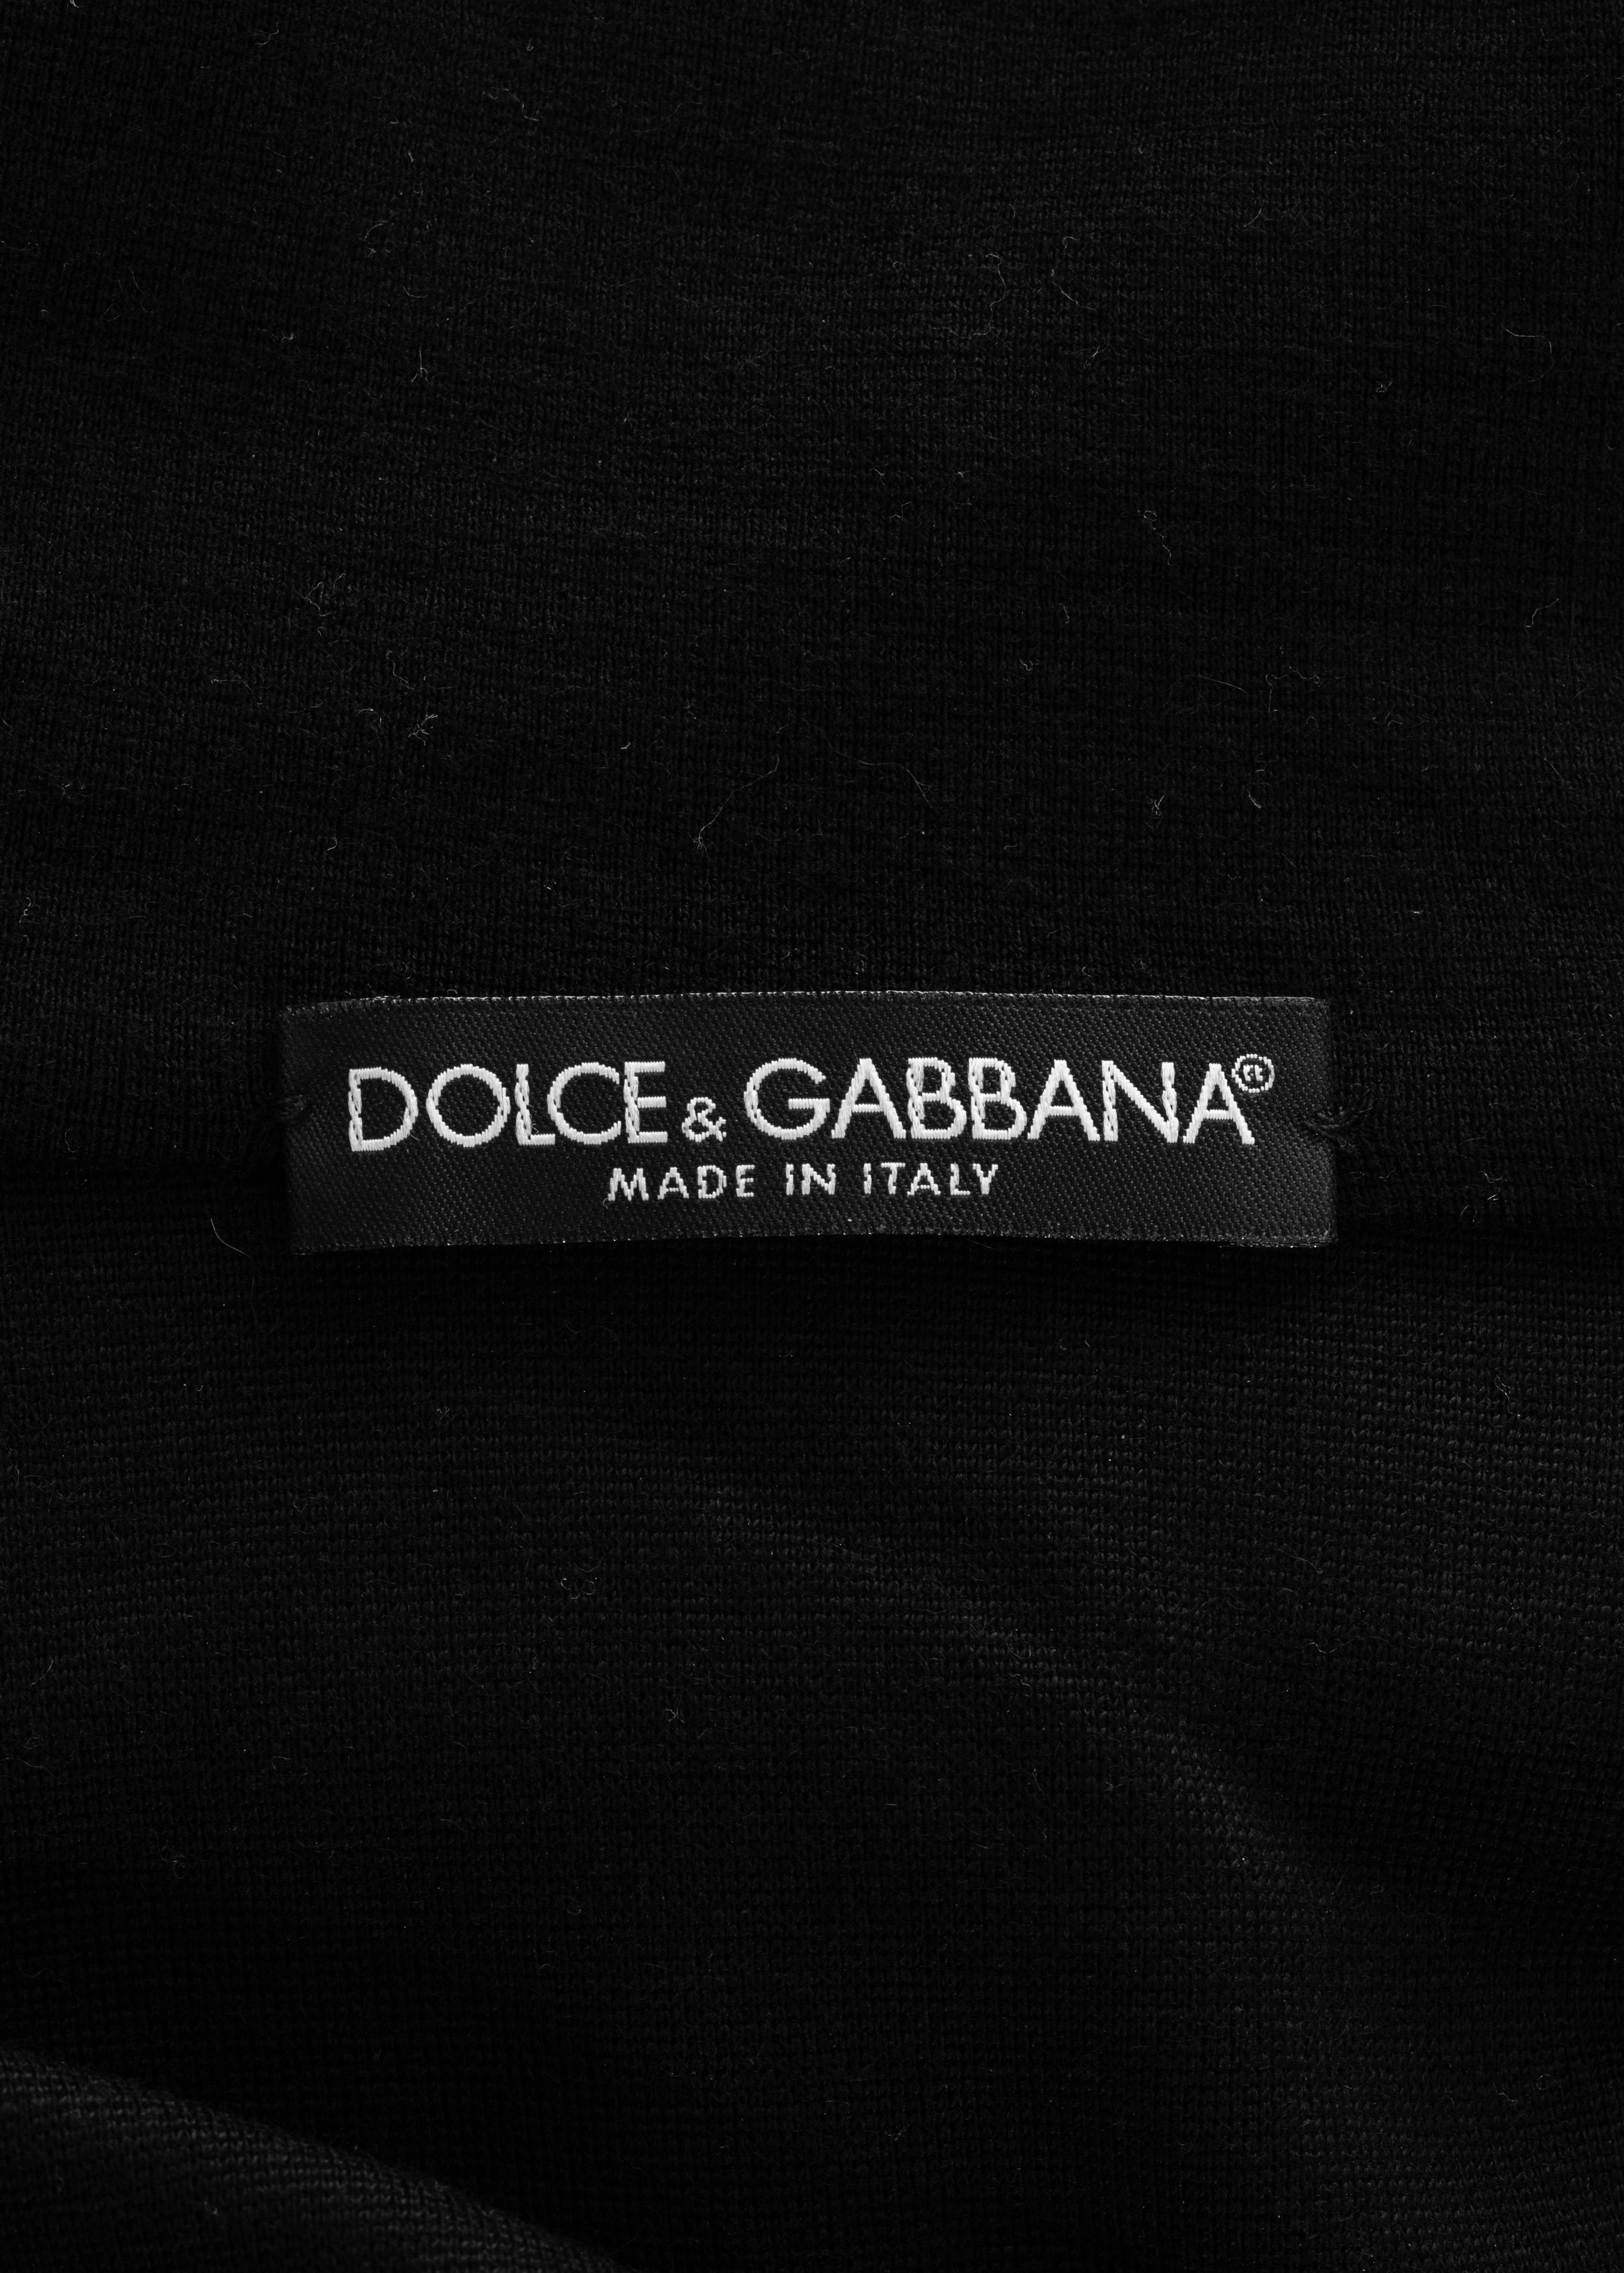 Dolce & Gabbana black wool jersey dress with silver press studs, fw 2003 For Sale 2